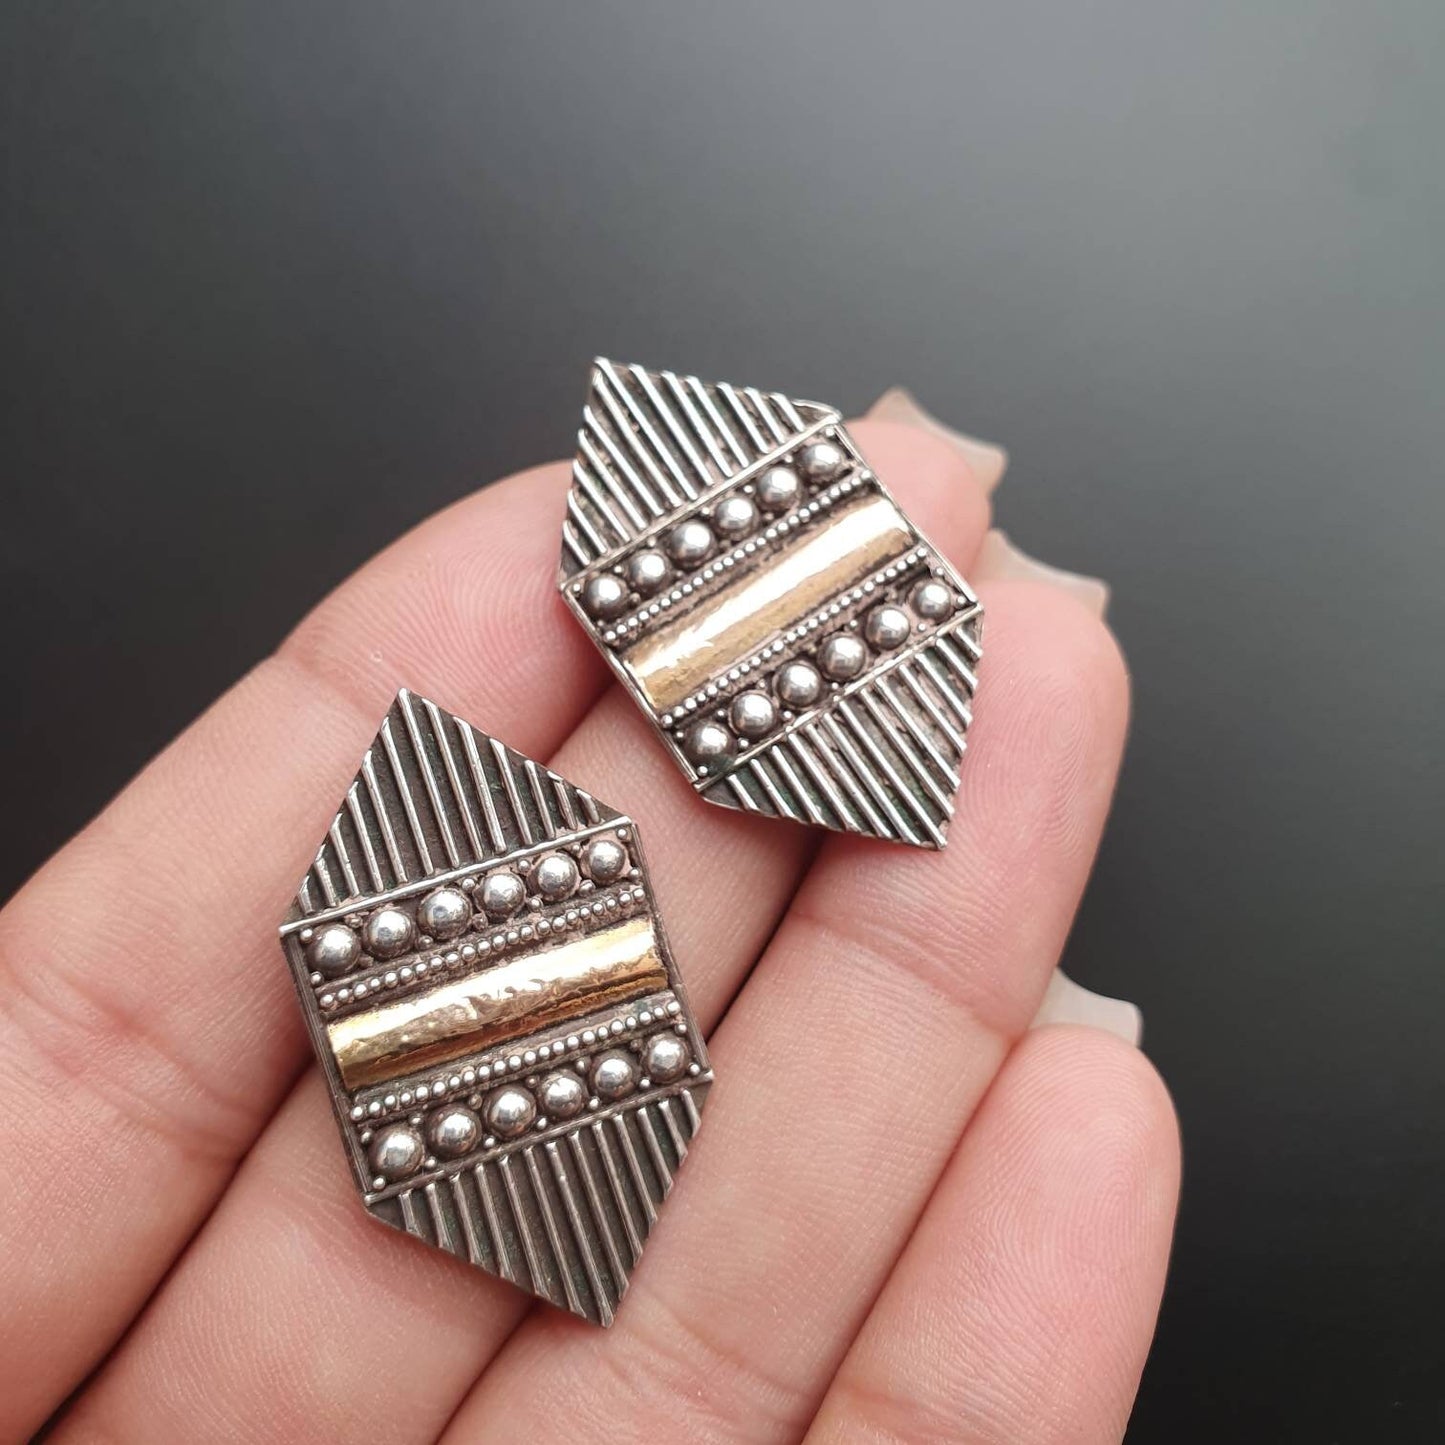 Vintage earrings, stud earrings, pierced ears, Aztec, sterling , tribal, unique,handmade ,elegant and classic, affordable gifts,stylish 925